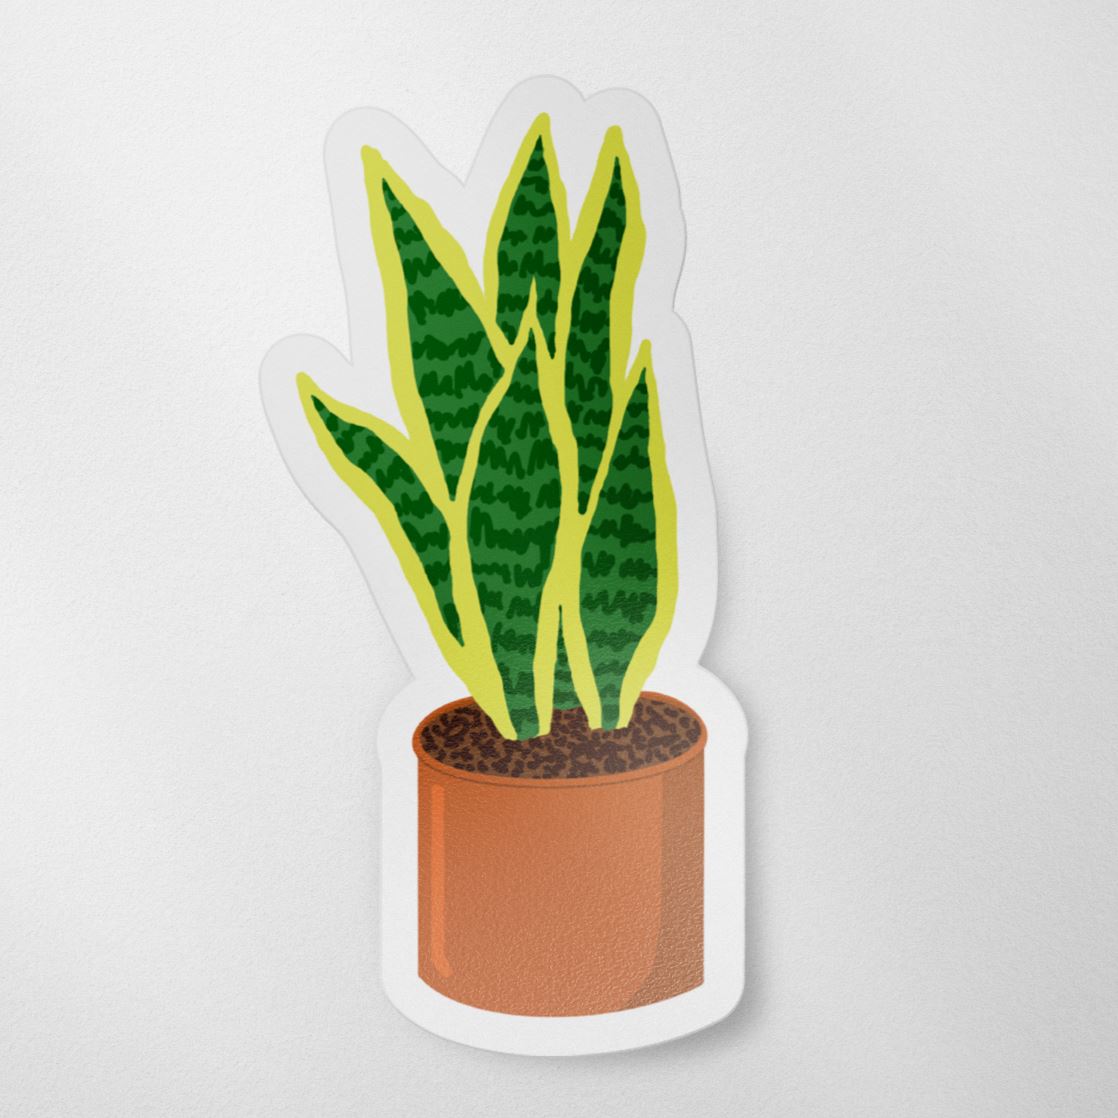 Vinyl matte sticker with a hand drawn illustration of a green and yellow snake plant in an orange terracotta pot against a white background.